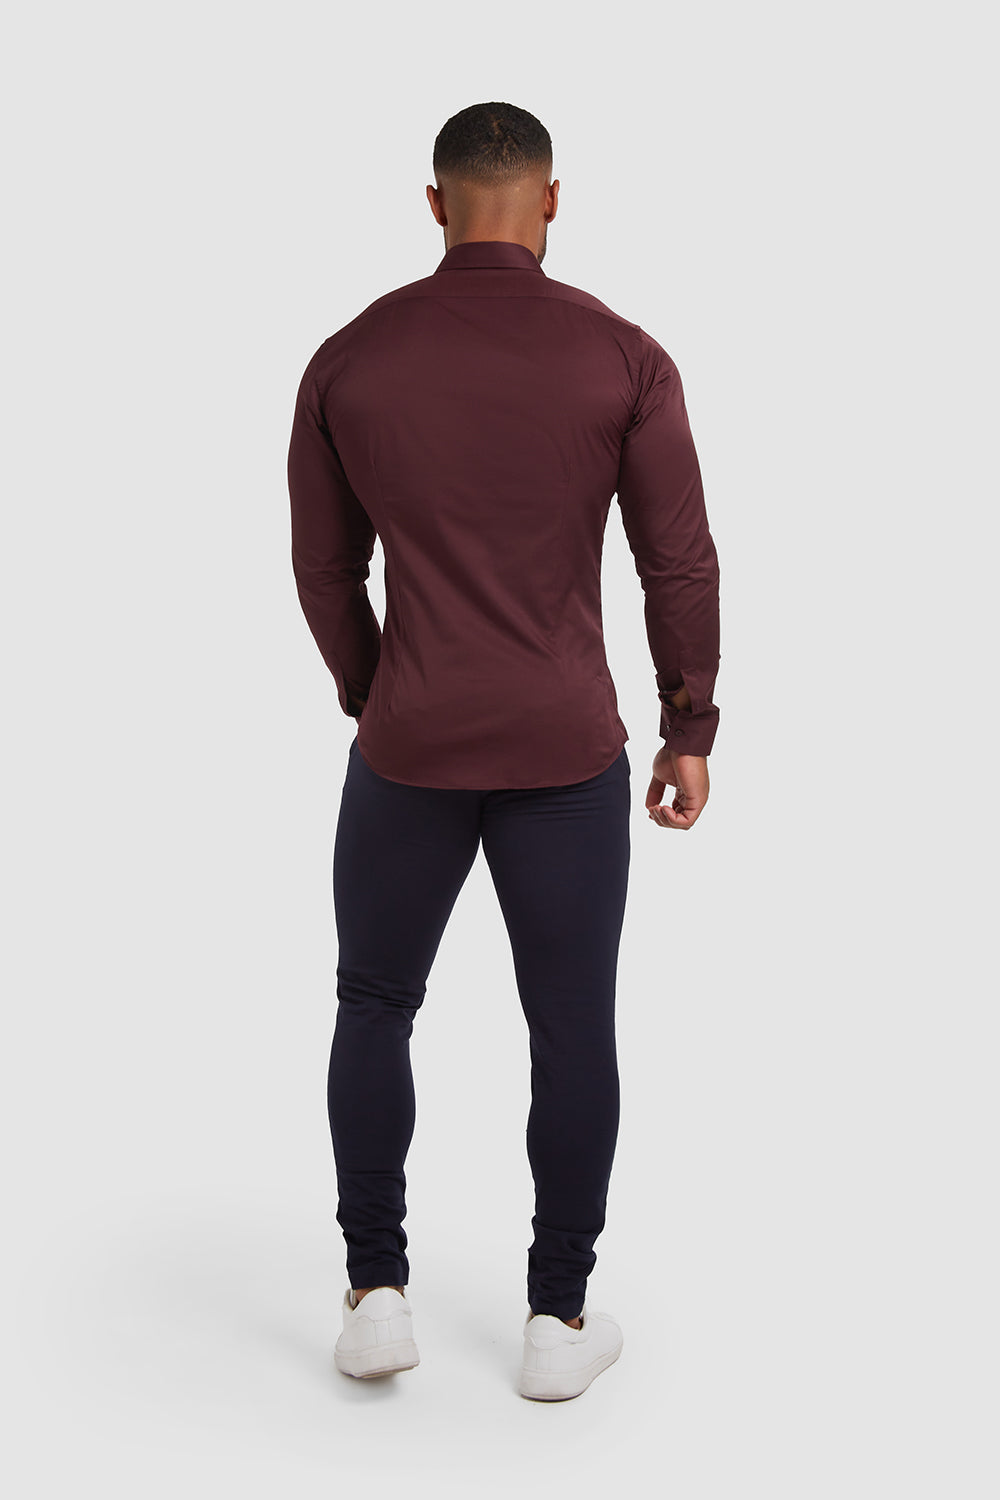 2.0 Fit TAILORED Burgundy - Muscle Shirt Signature - USA in ATHLETE